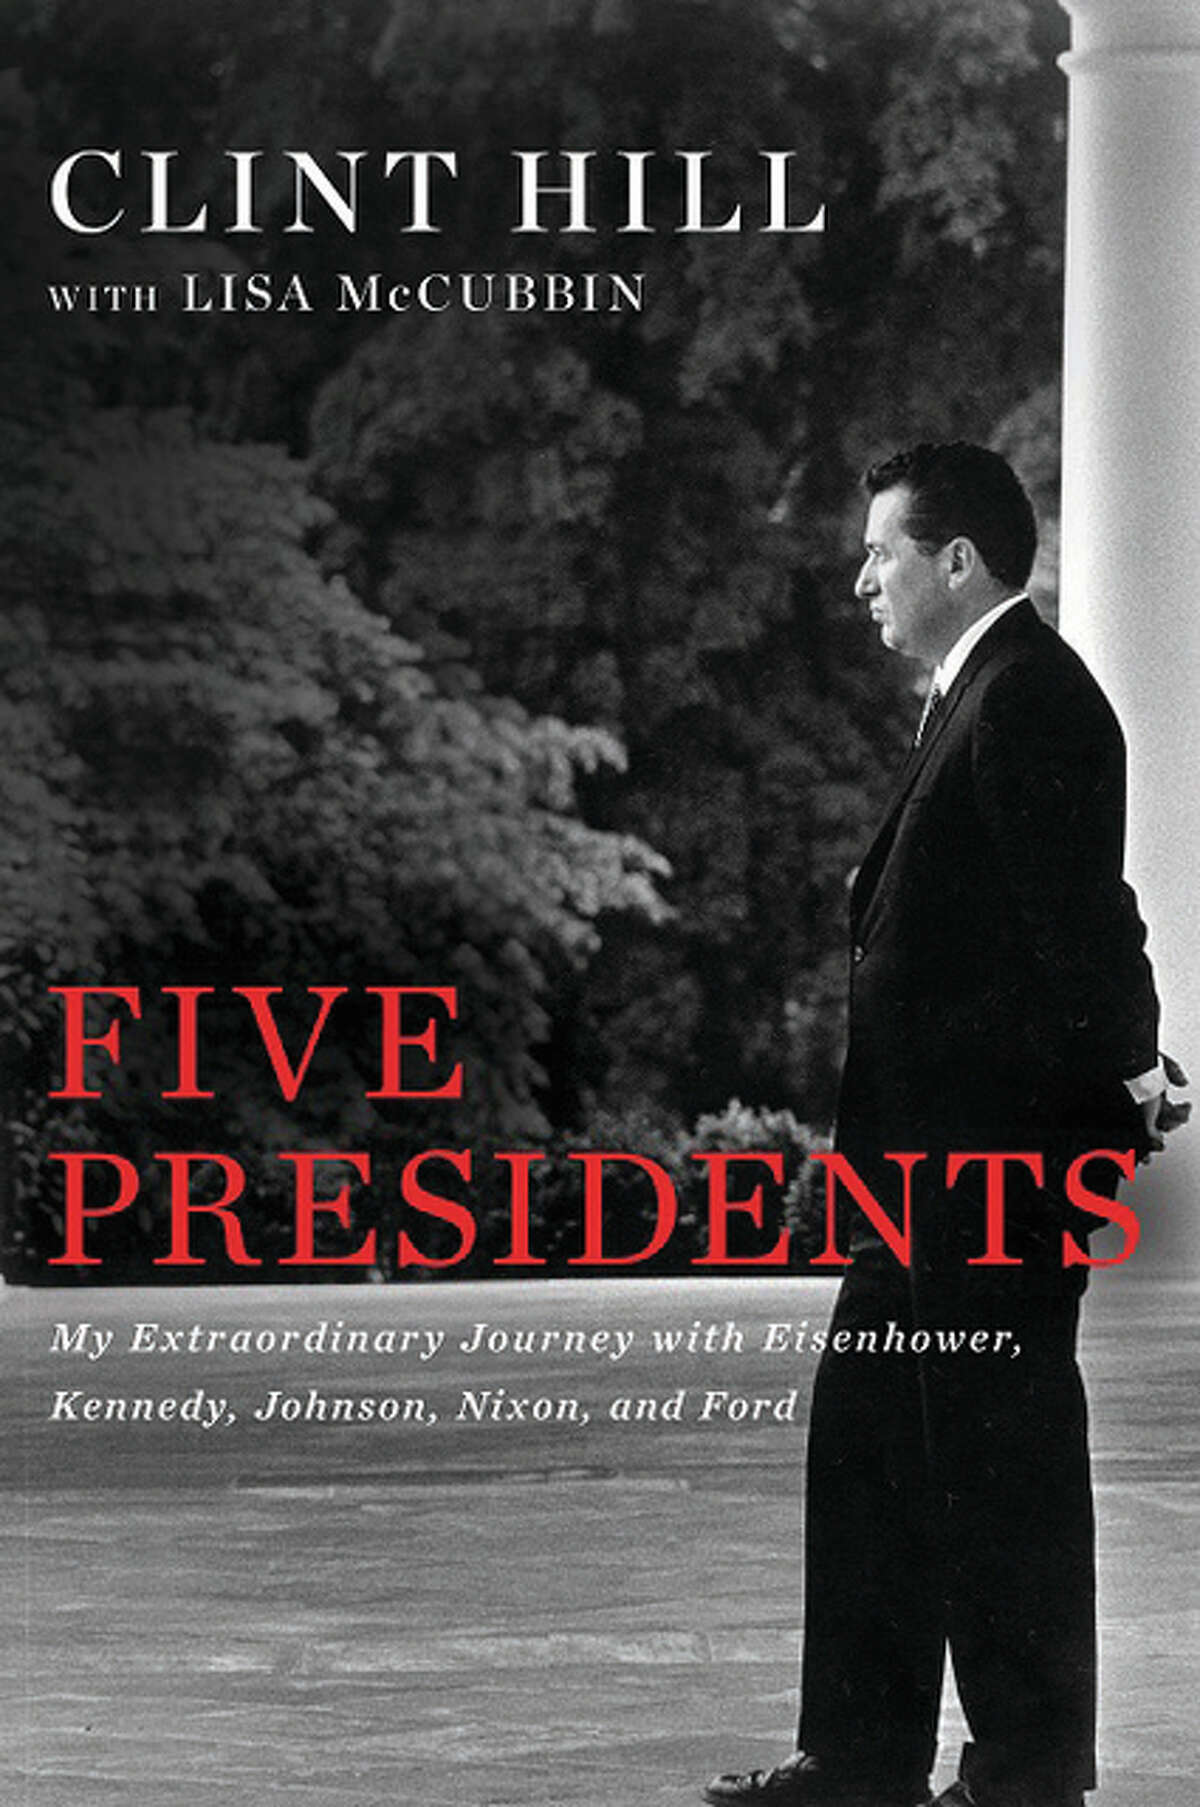 In his newest book, “Five Presidents: My Extraordinary Journey with Eisenhower, Kennedy, Johnson, Nixon, and Ford,” Clint Hill, with co-author Lisa McCubbin, gives an account of things that happened during his years in the U.S. Secret Service from 1958 to 1975, when he retired as assistant director.